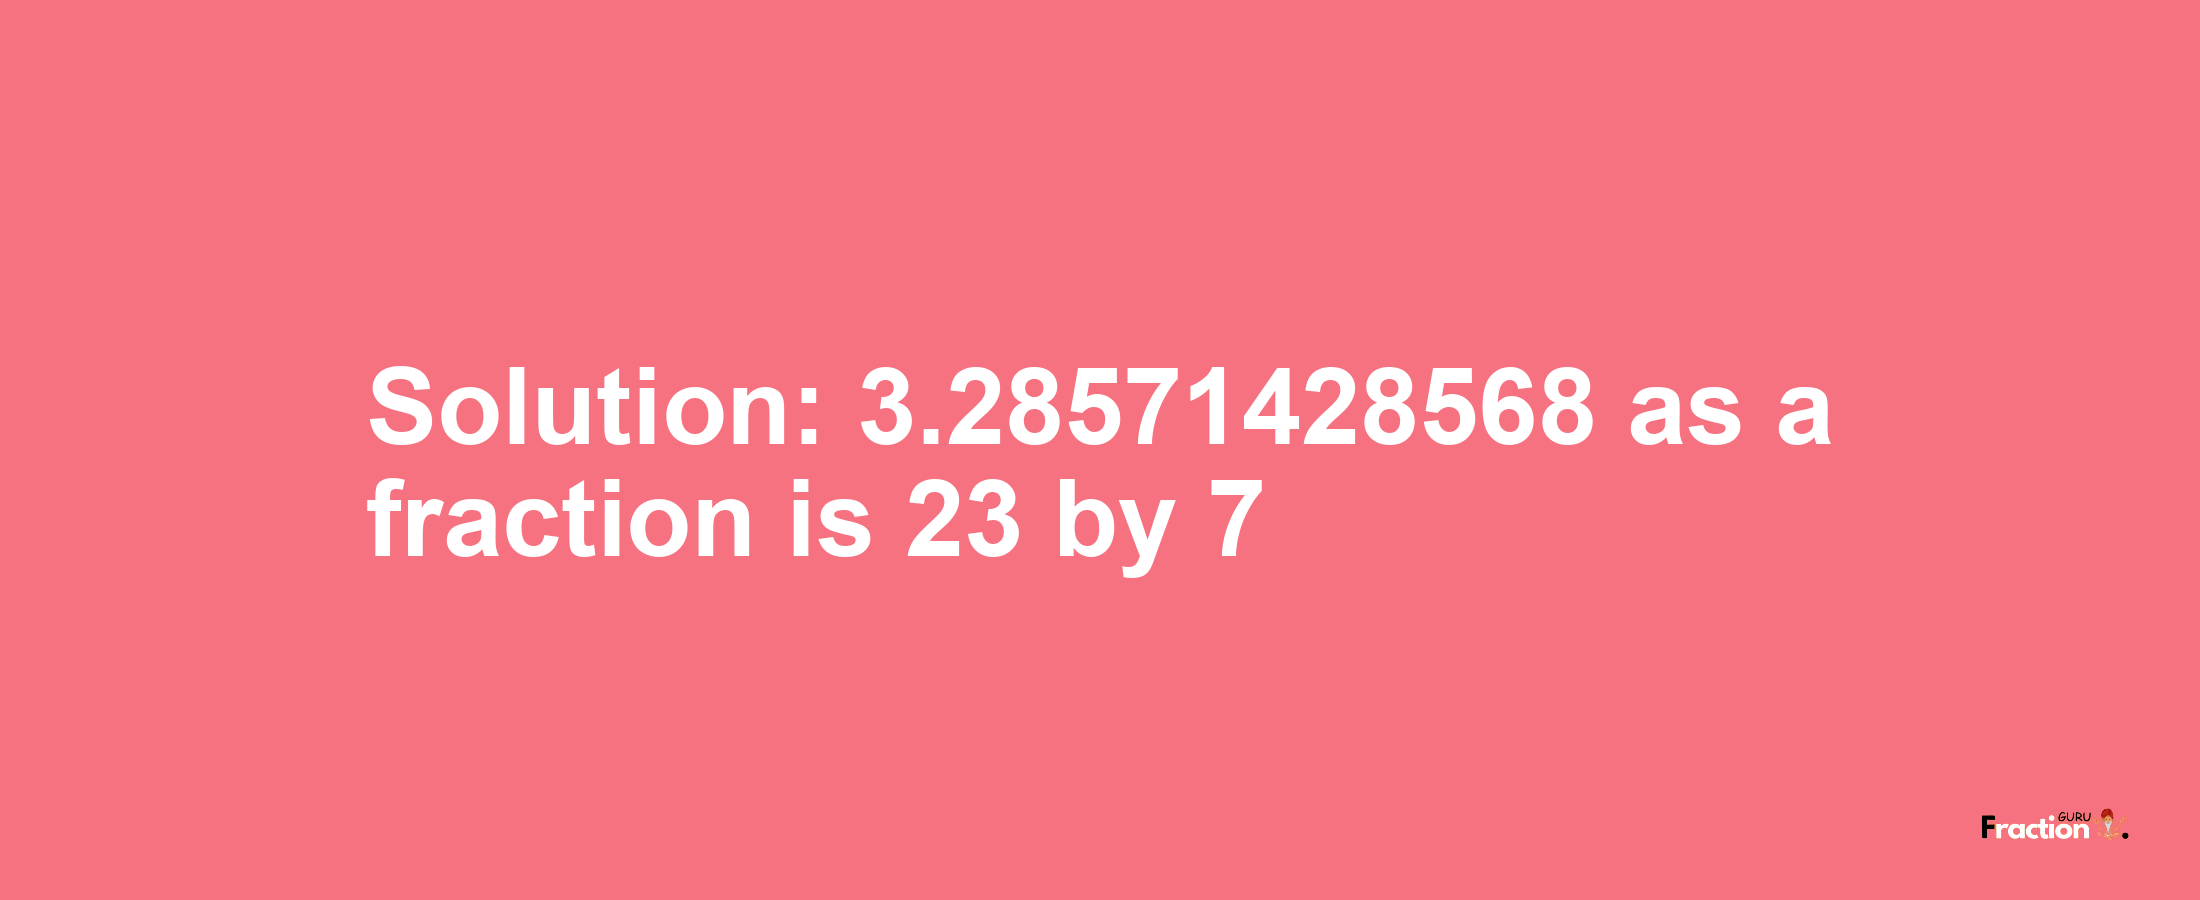 Solution:3.28571428568 as a fraction is 23/7